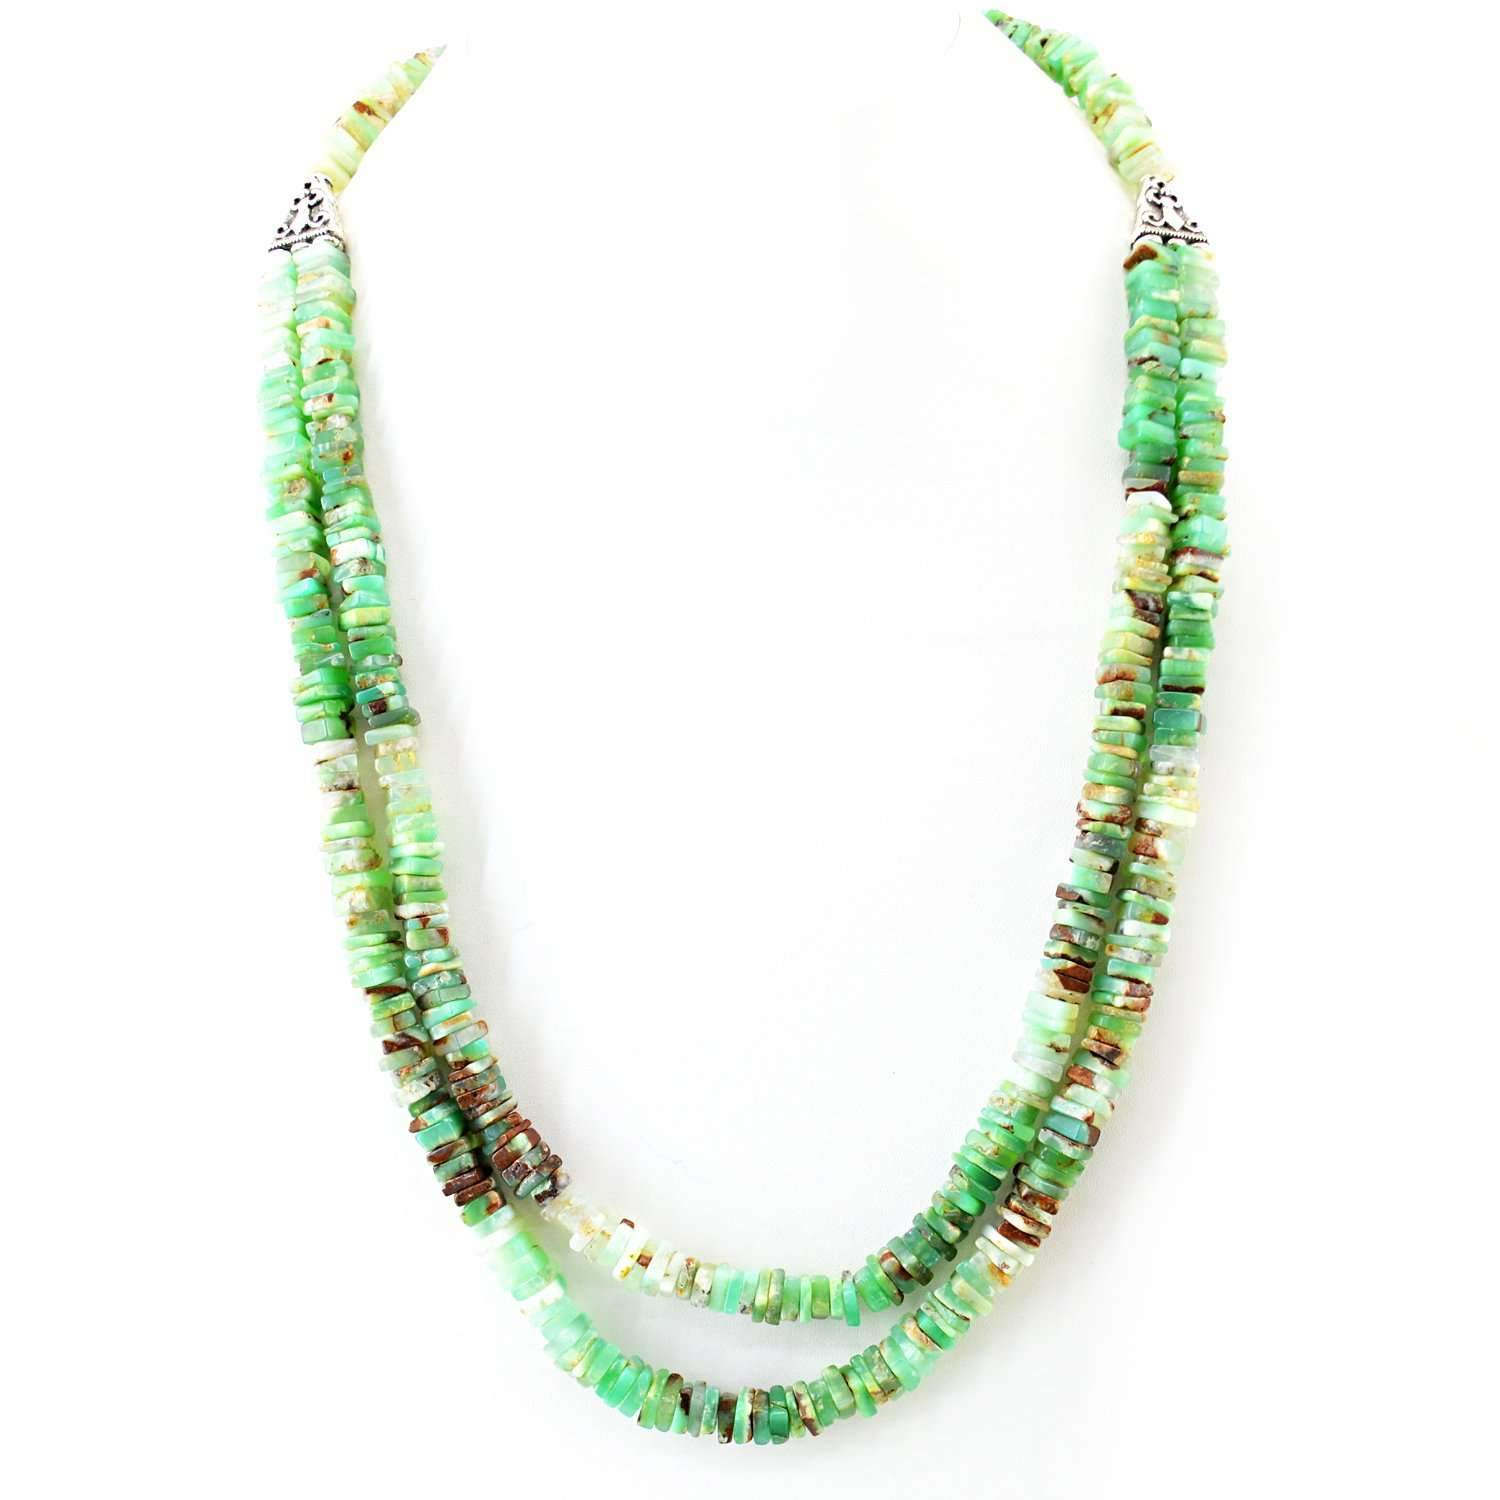 gemsmore:2 Strand Peruvian Opal Necklace Natural Untreated Beads - Wholesale Price